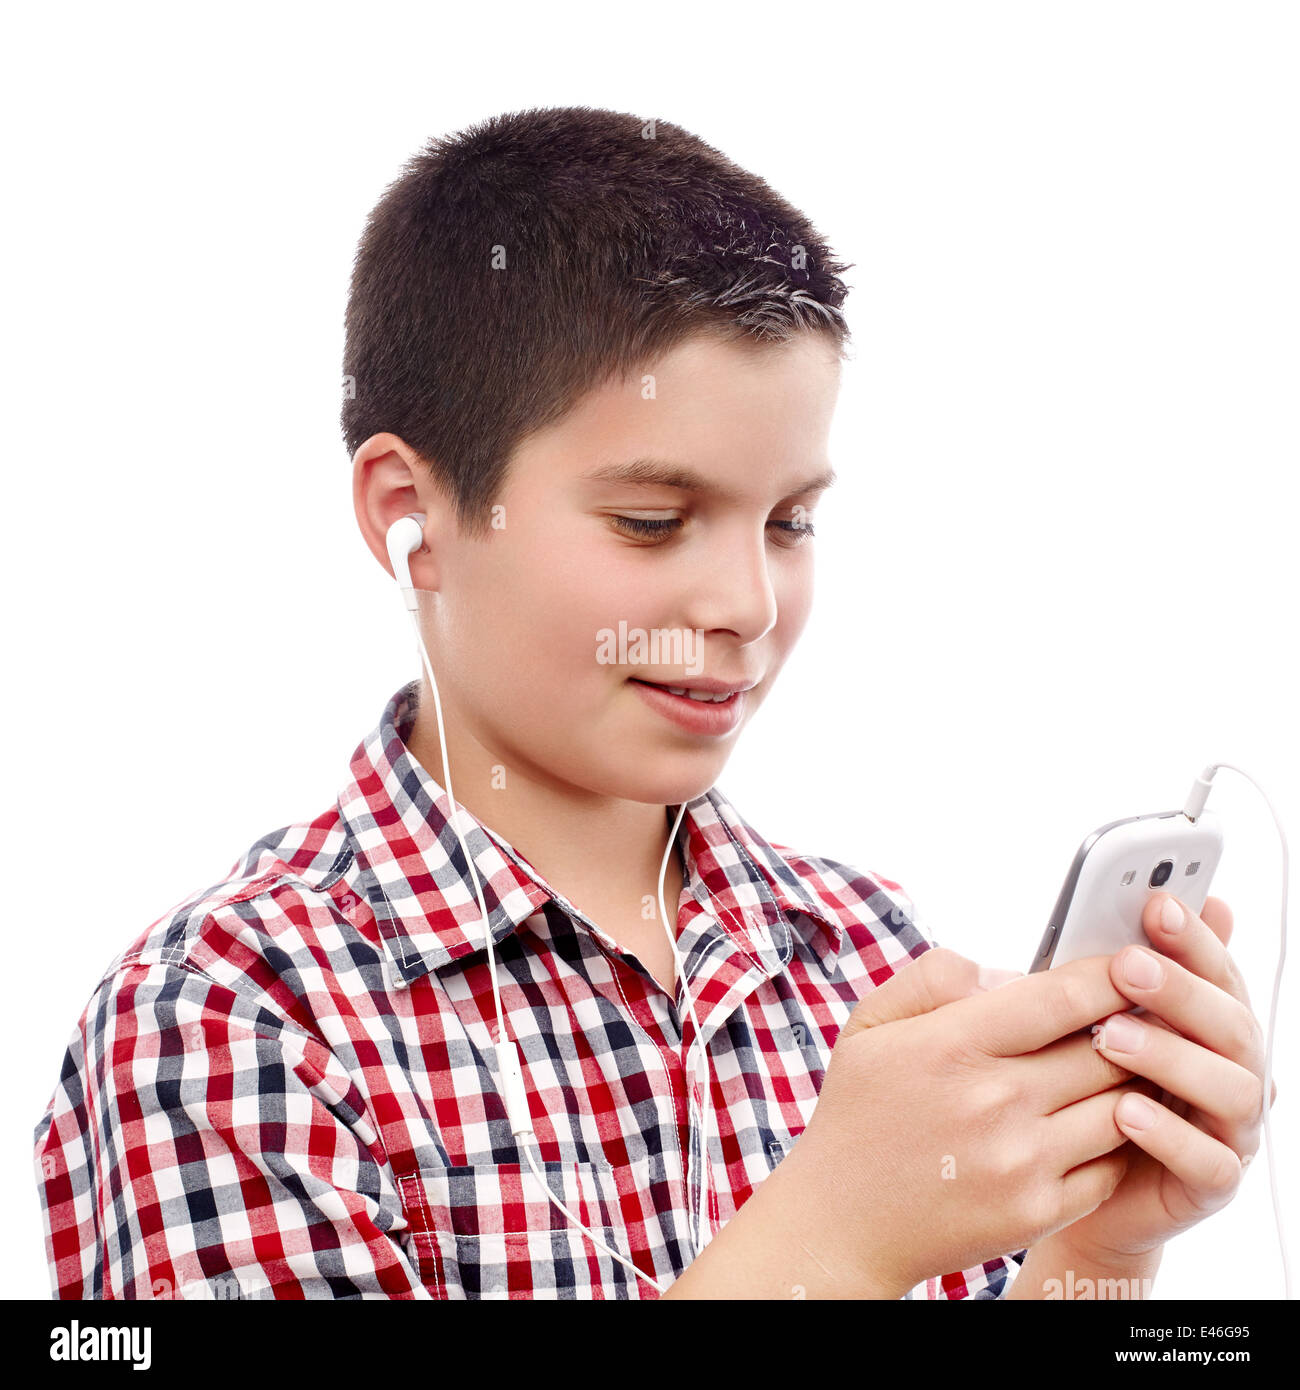 Young boy searching something on a smart phone Stock Photo